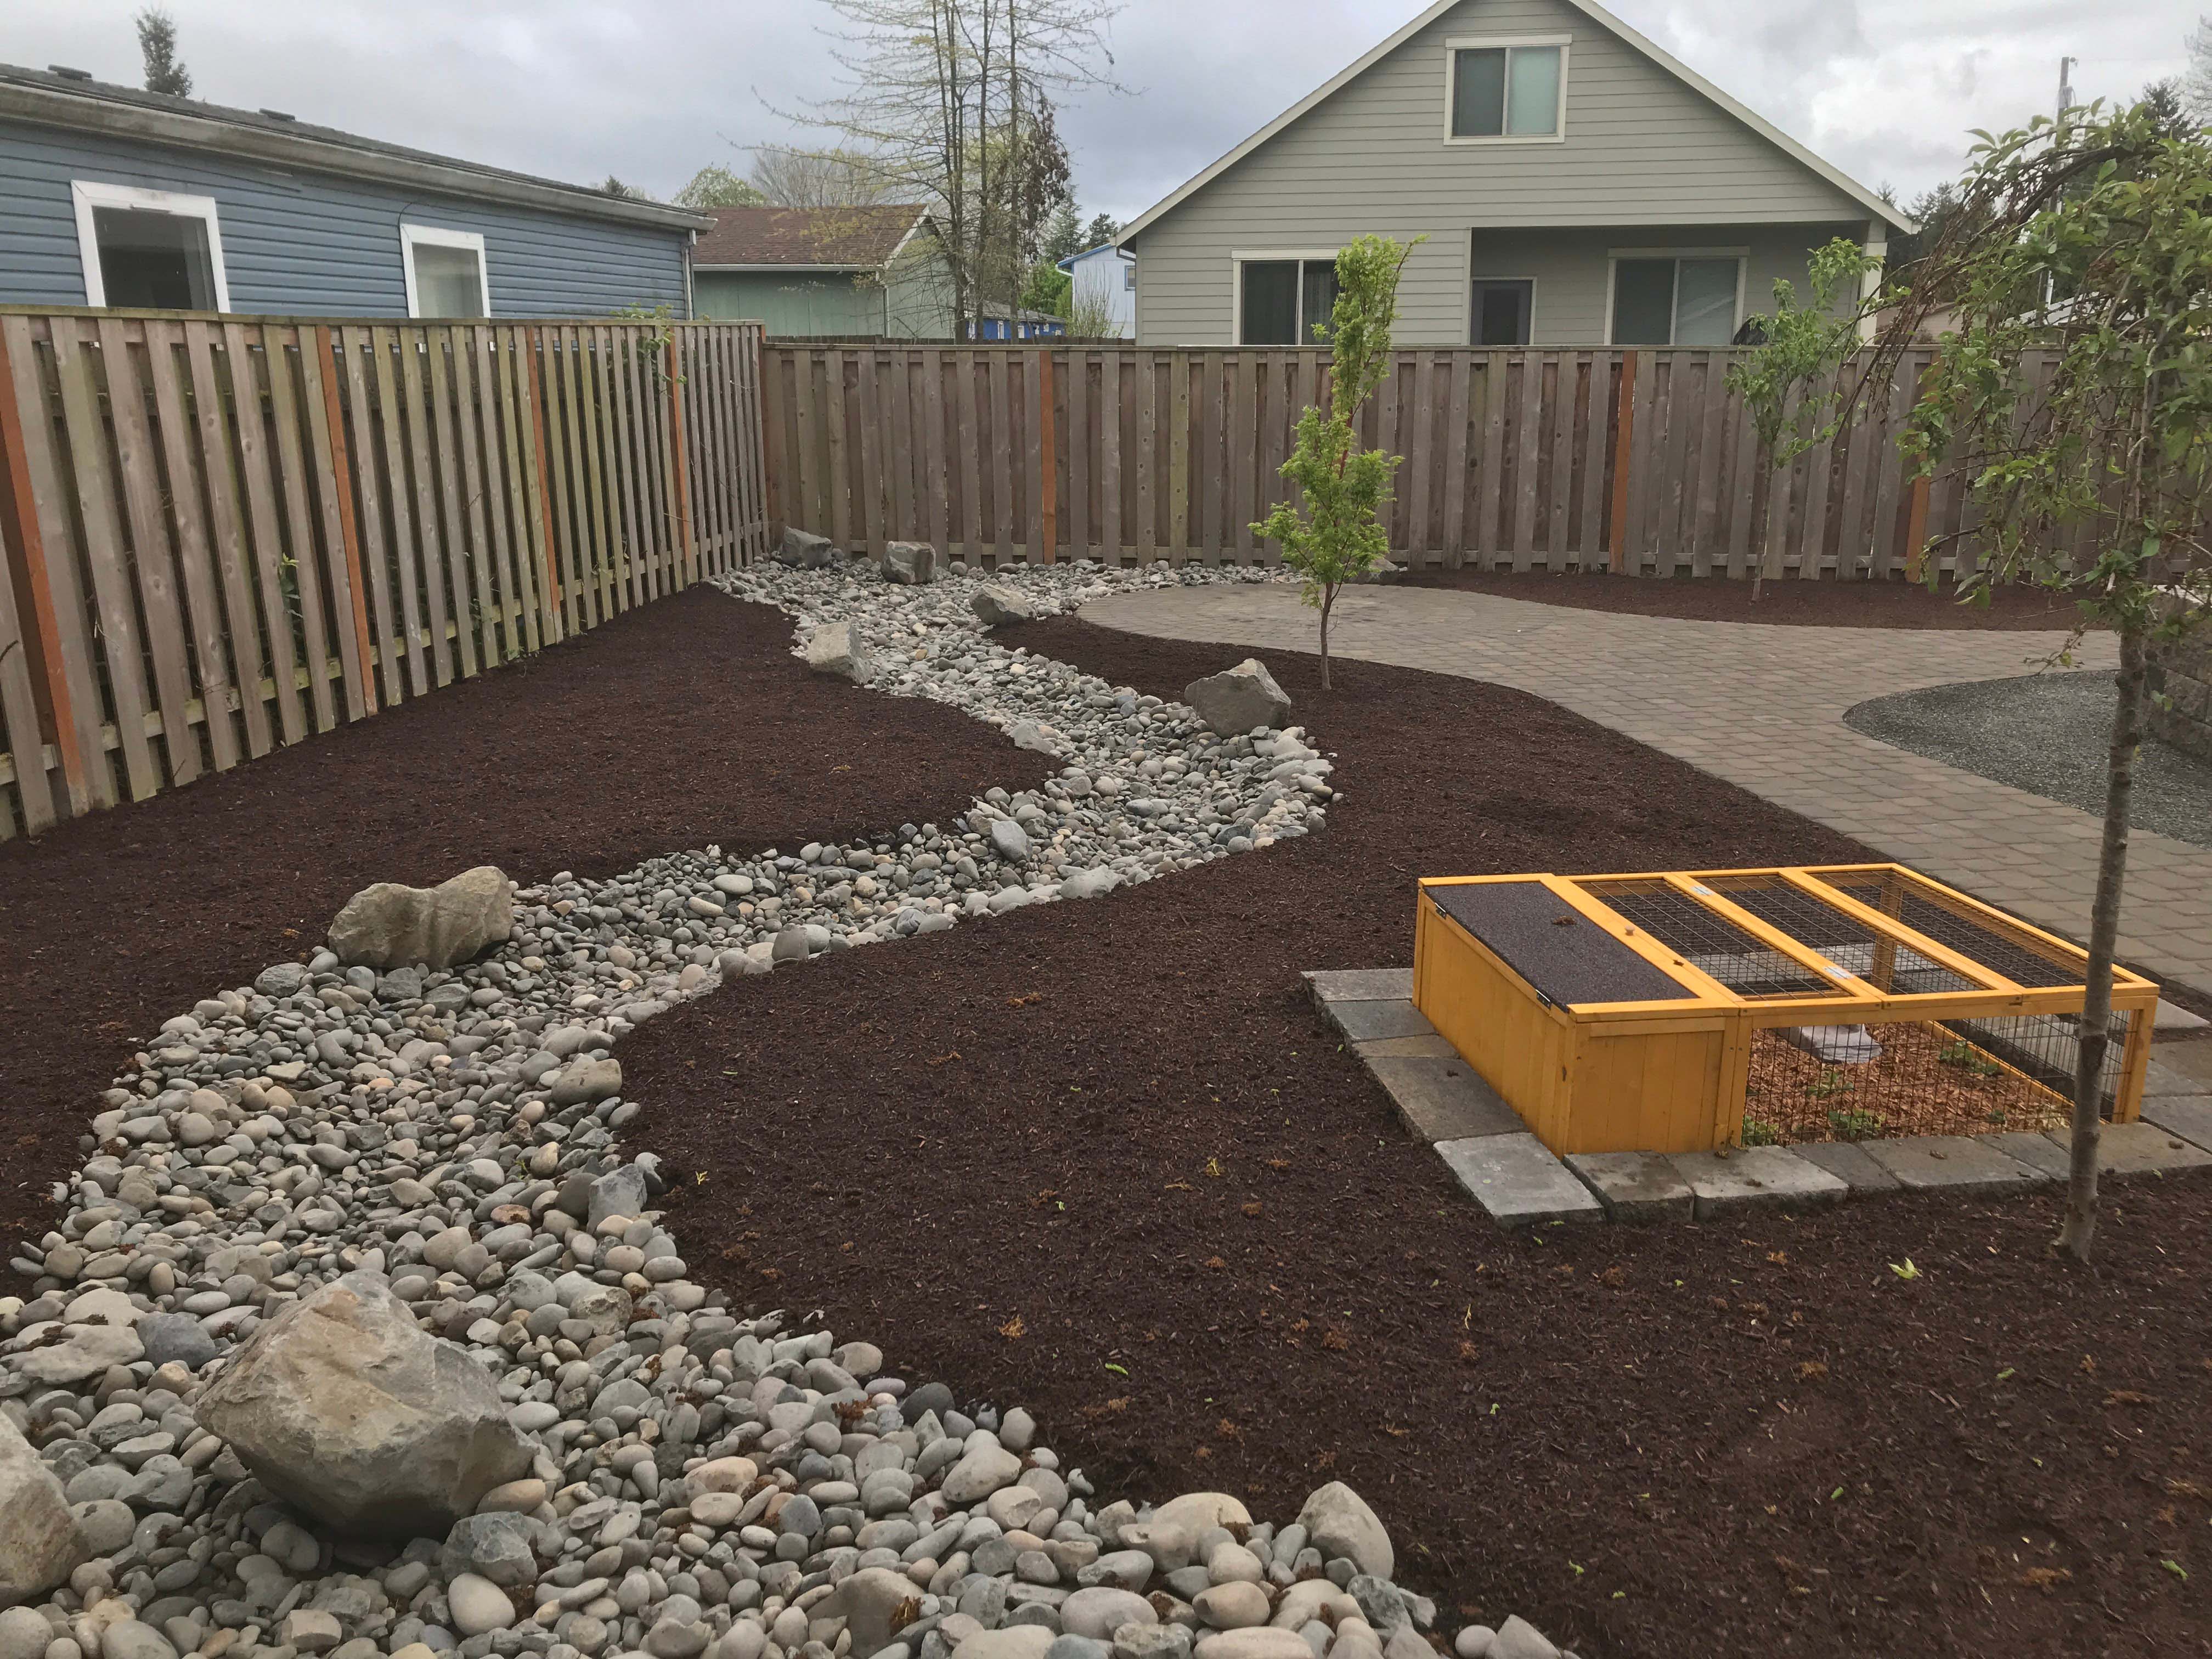 After photo of the backyard with a completely brand new layout including stone path, mulch beds, flowing stone section and newly planted trees